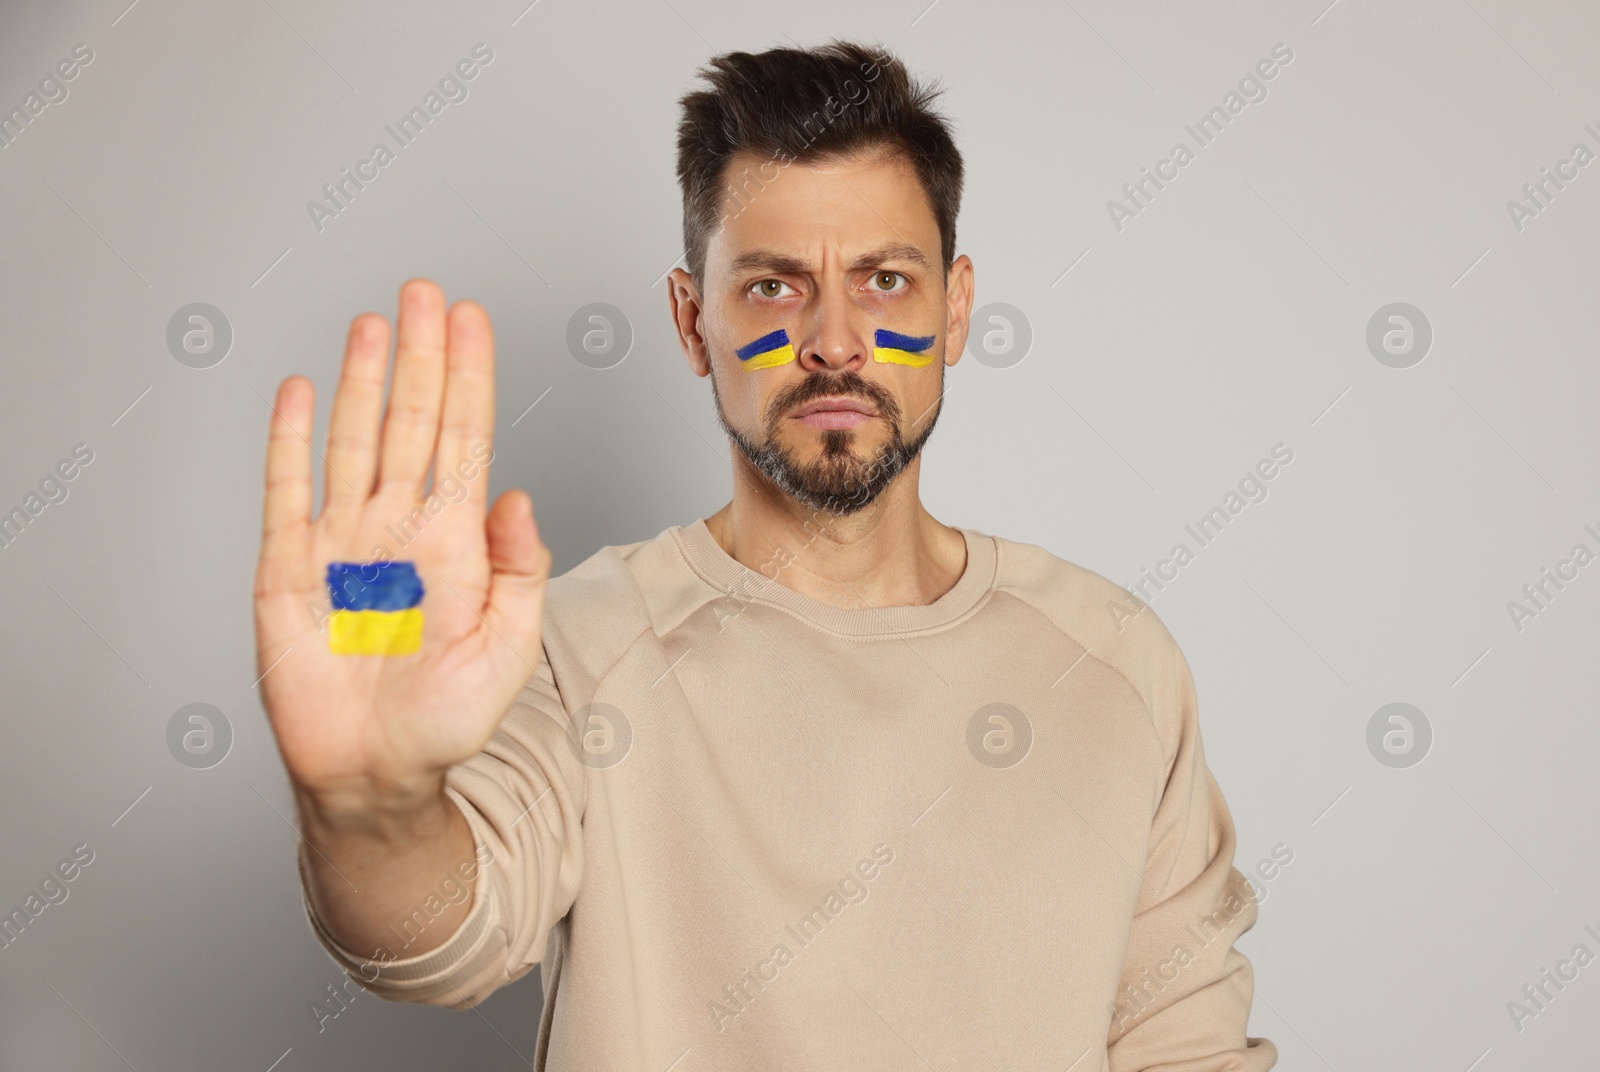 Photo of Angry man with drawings of Ukrainian flag on face and palm against light grey background